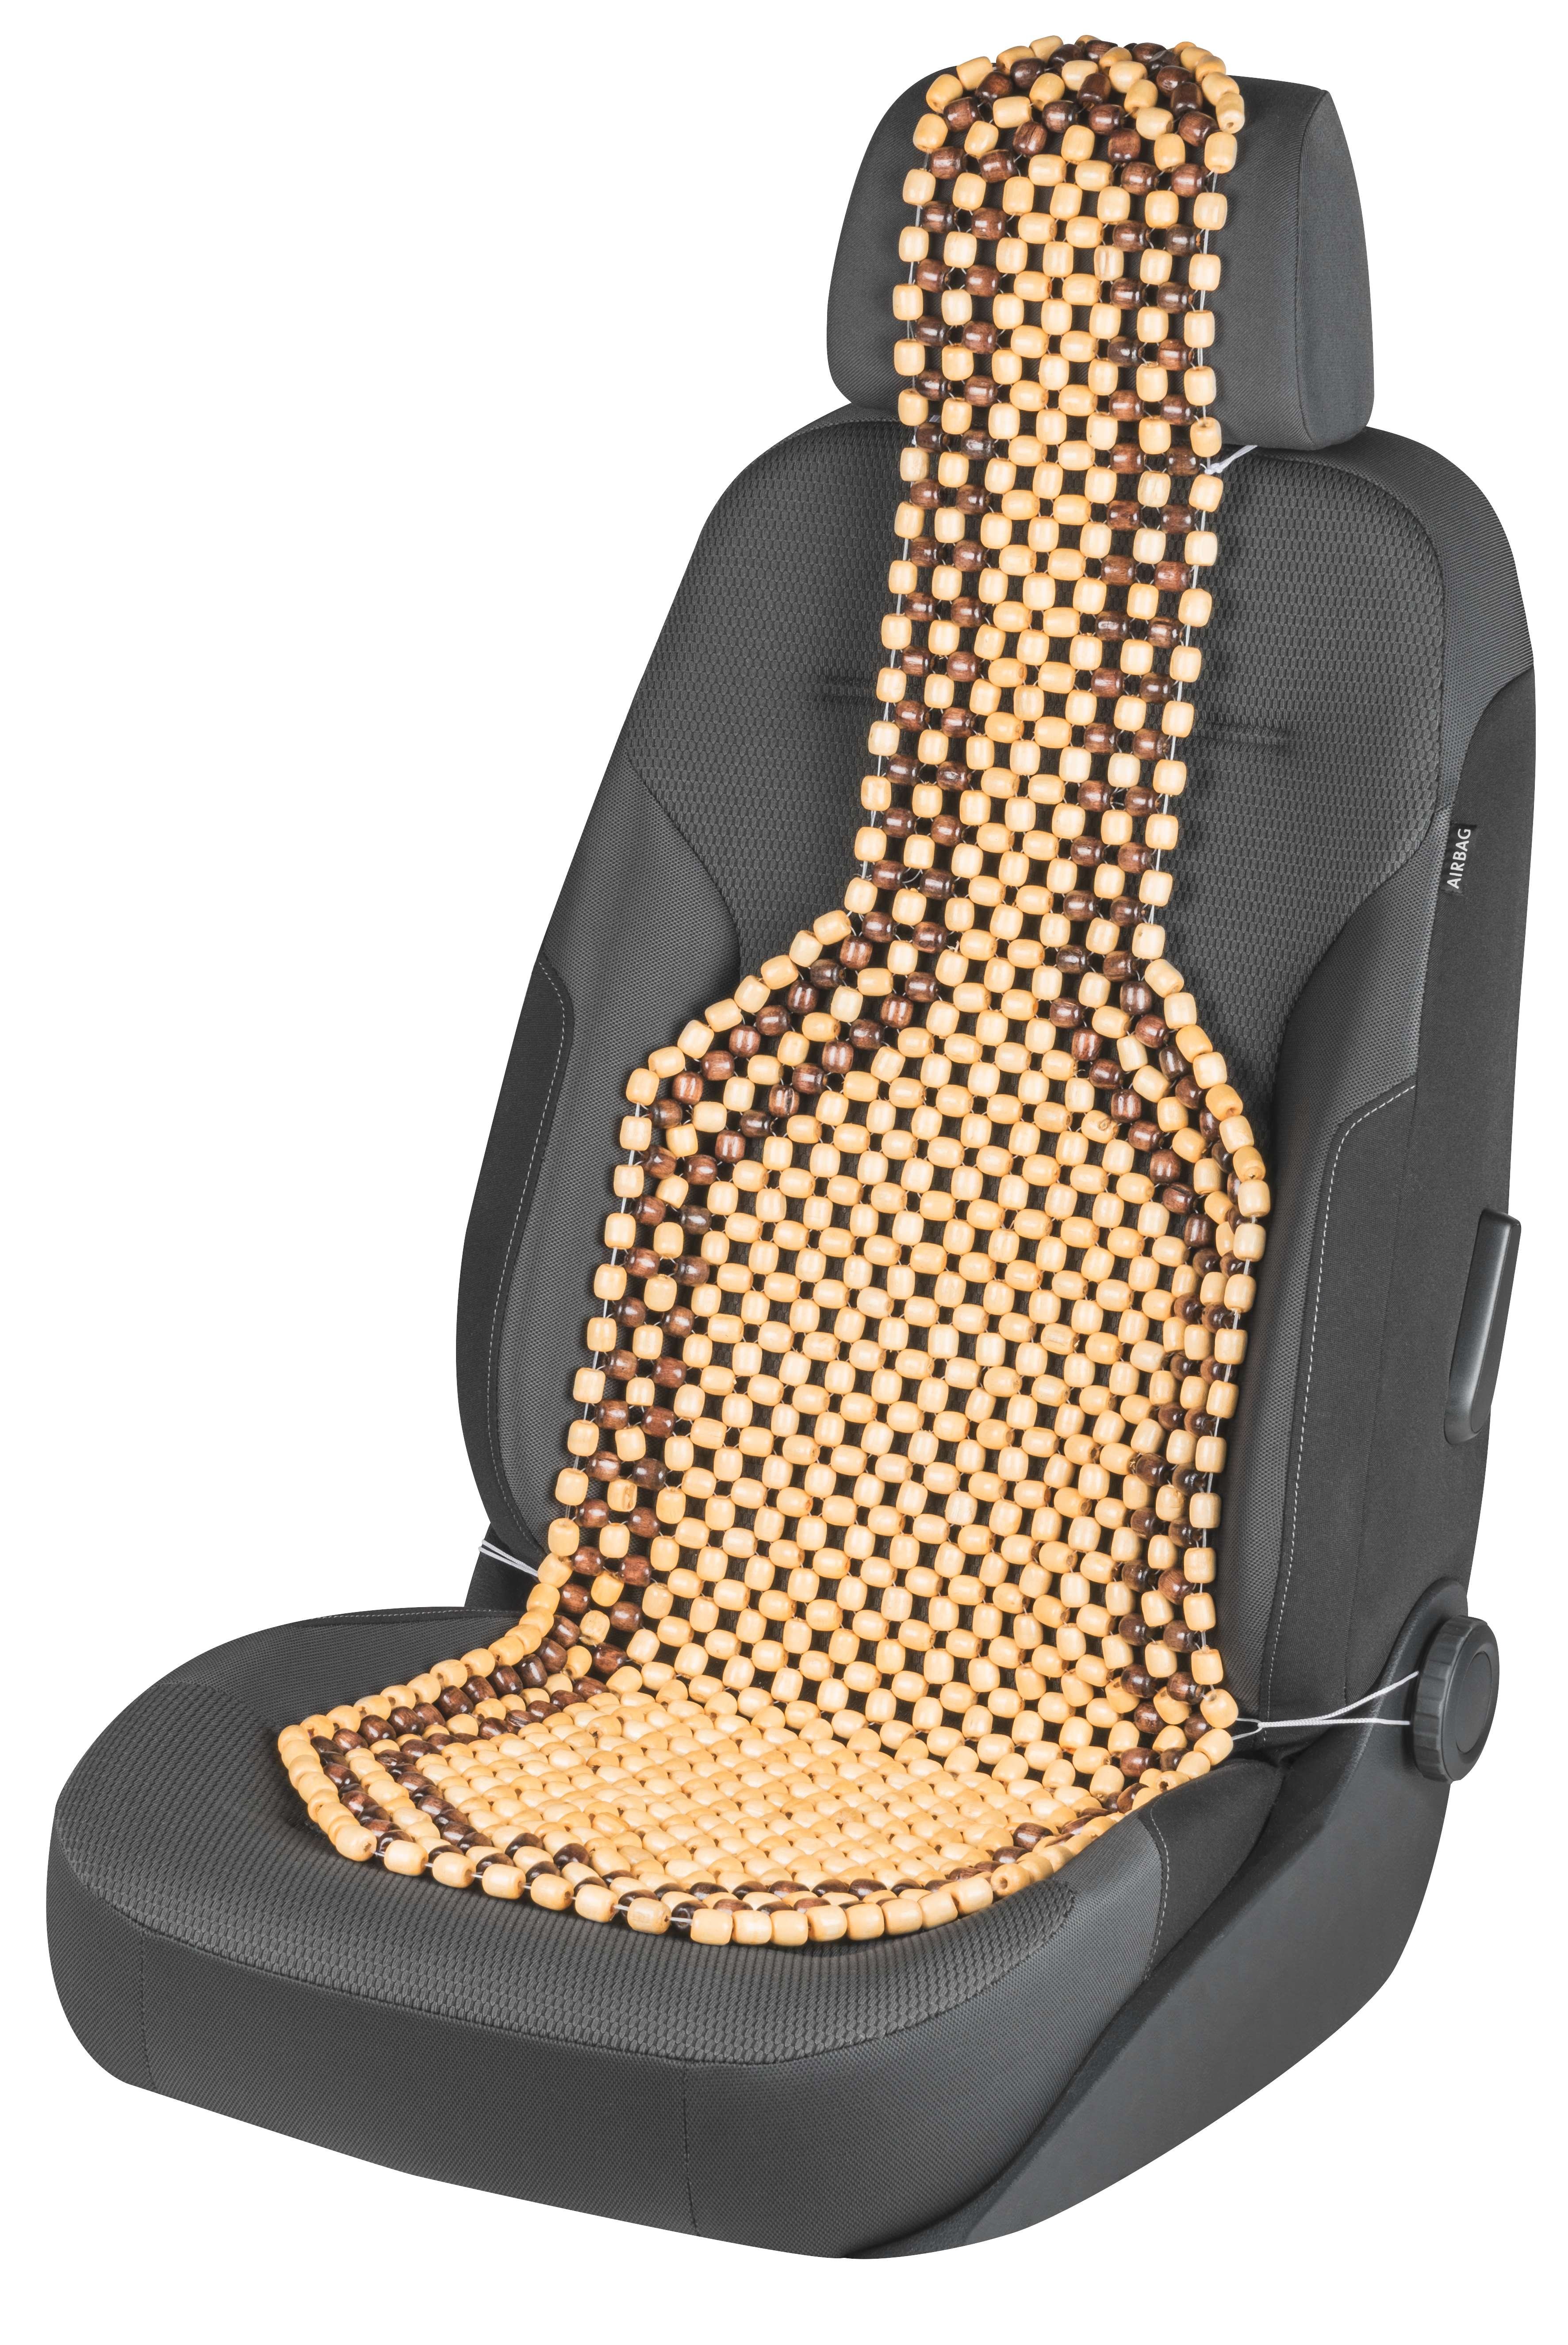 Car Seat Cover Made Of Wood Beads, Wooden Beaded Car Seat Cover Uk